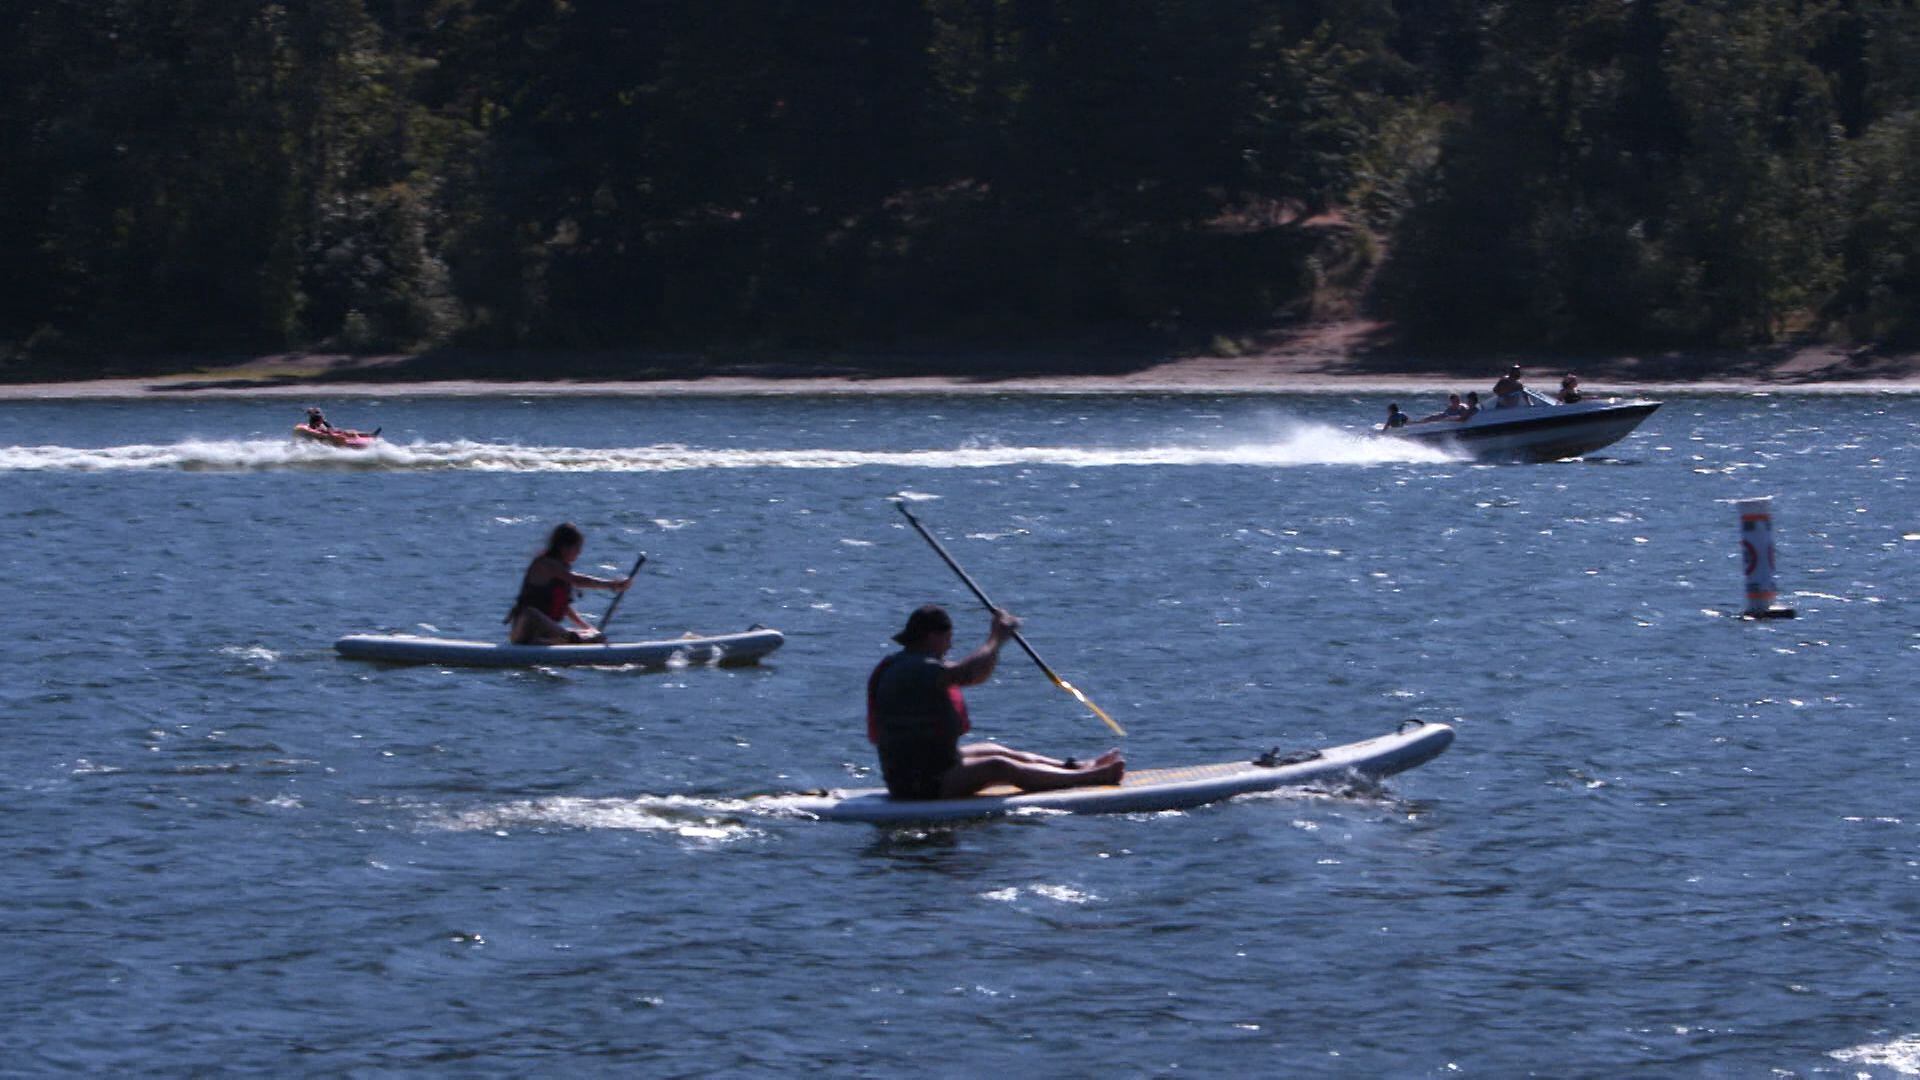 Stand-up paddleboarders pass through a no-wake zone near a group of floating homes where towed water sports like tubing are no longer allowed from May through September on this crowded stretch of the Willamette River.